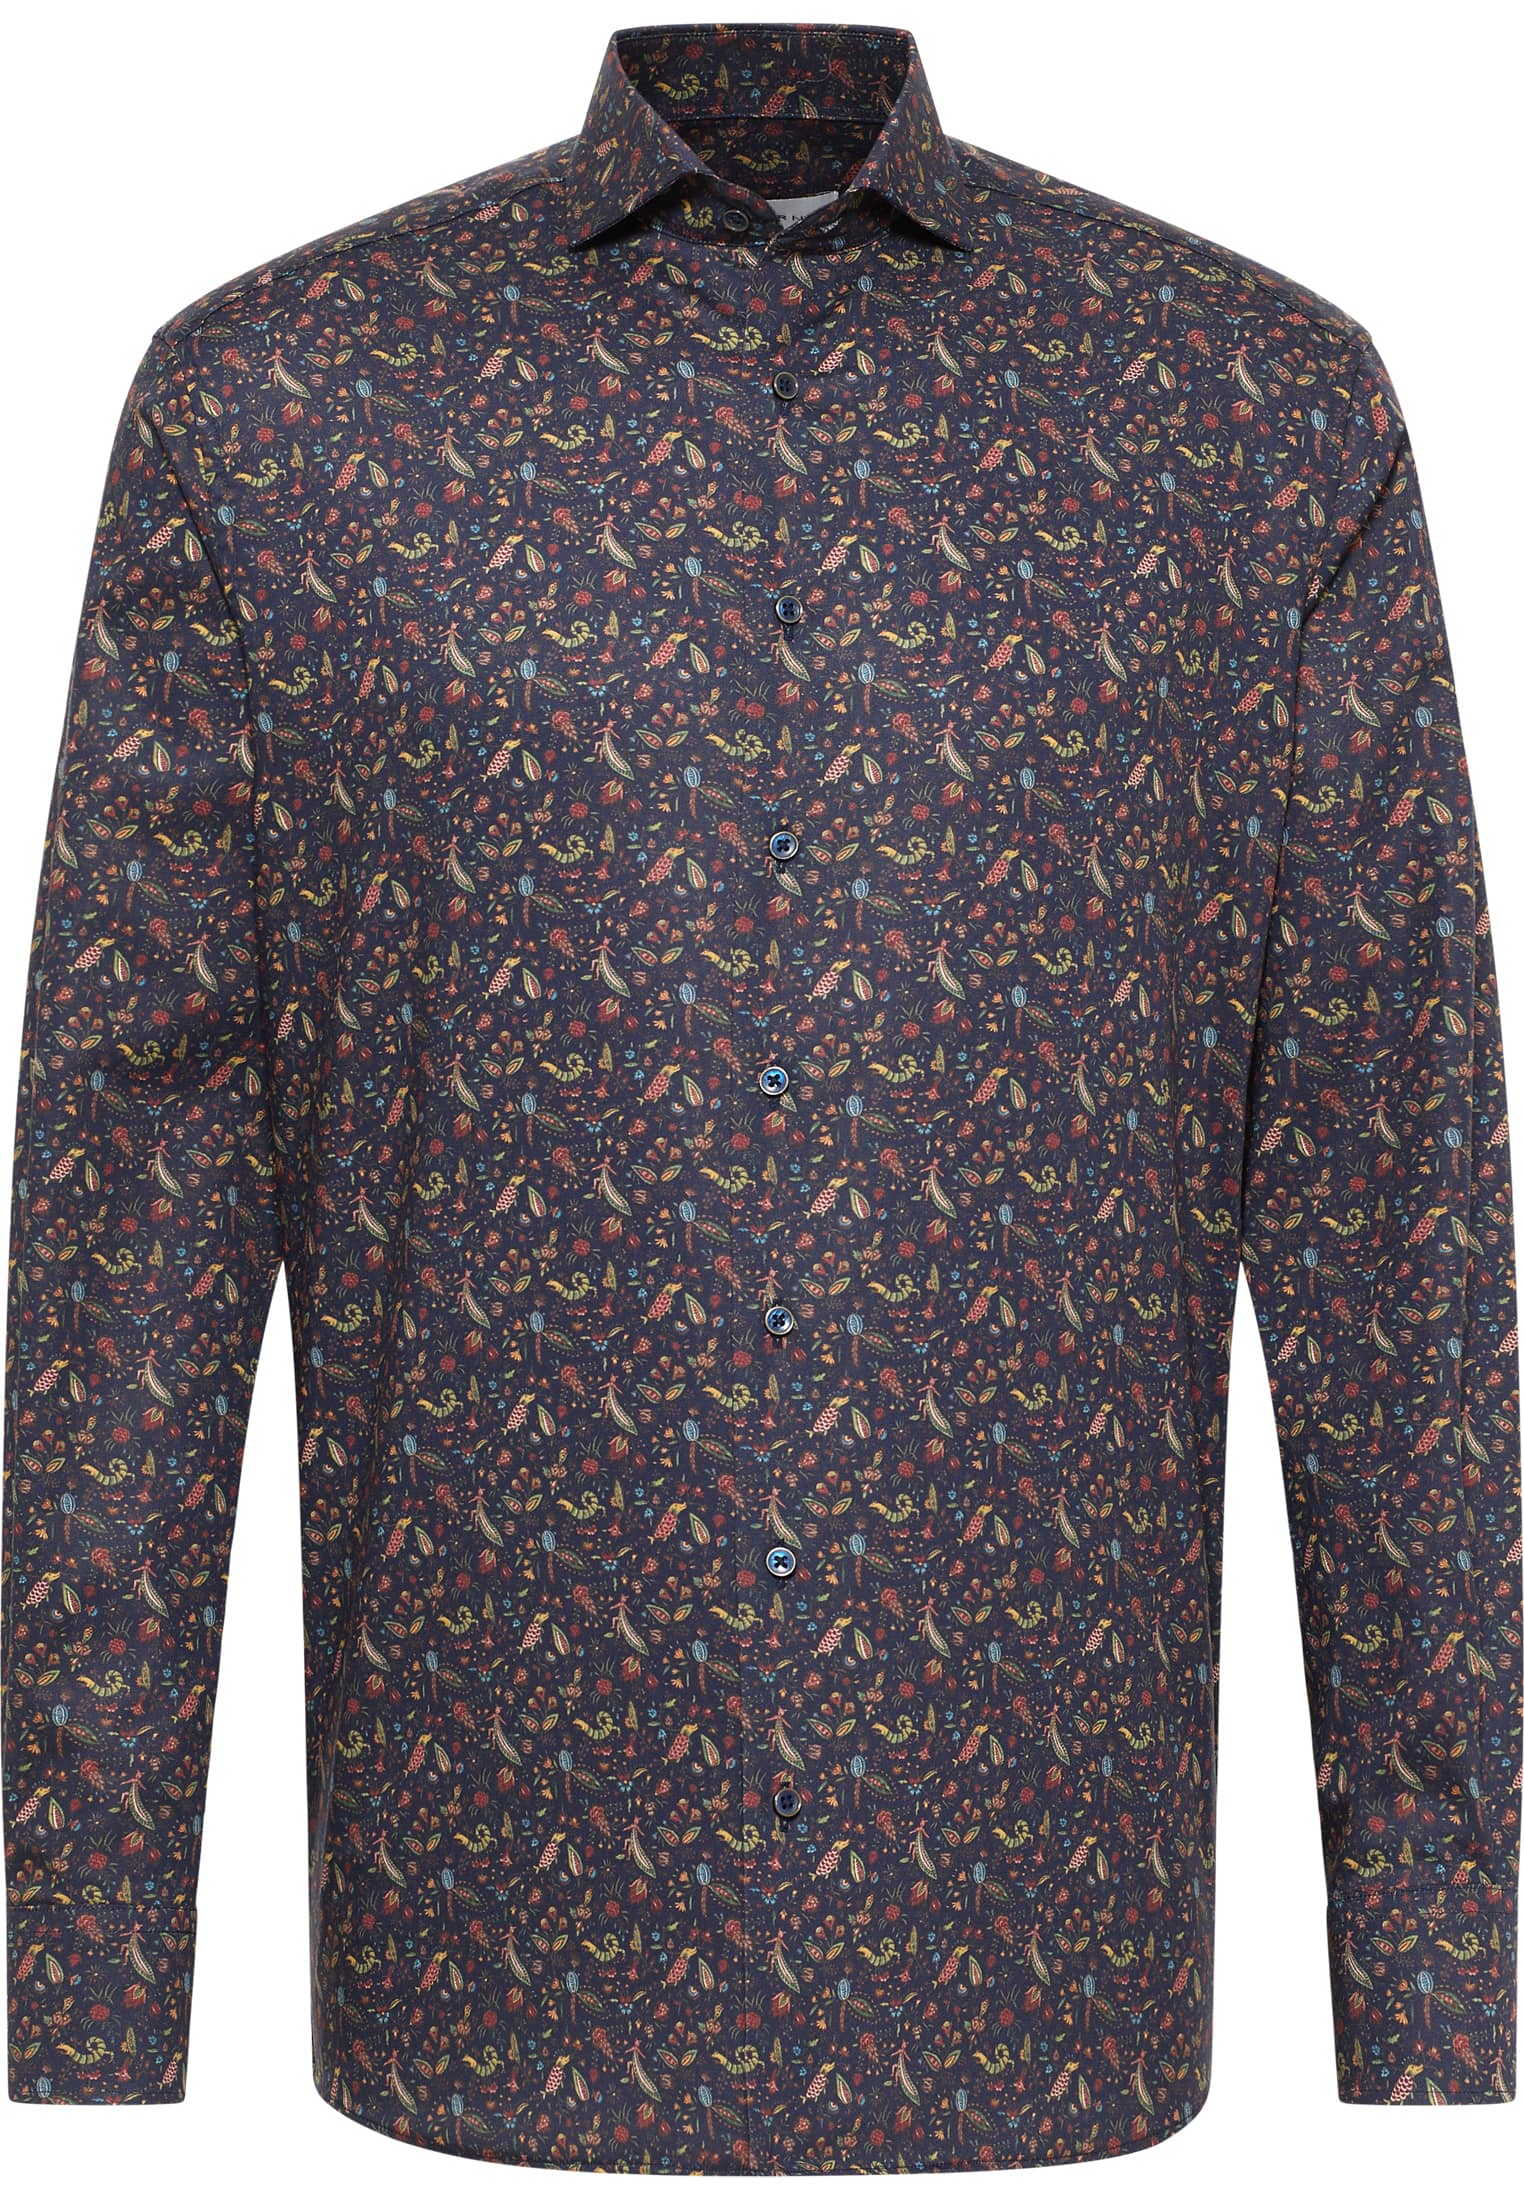 MODERN FIT Shirt in navy printed